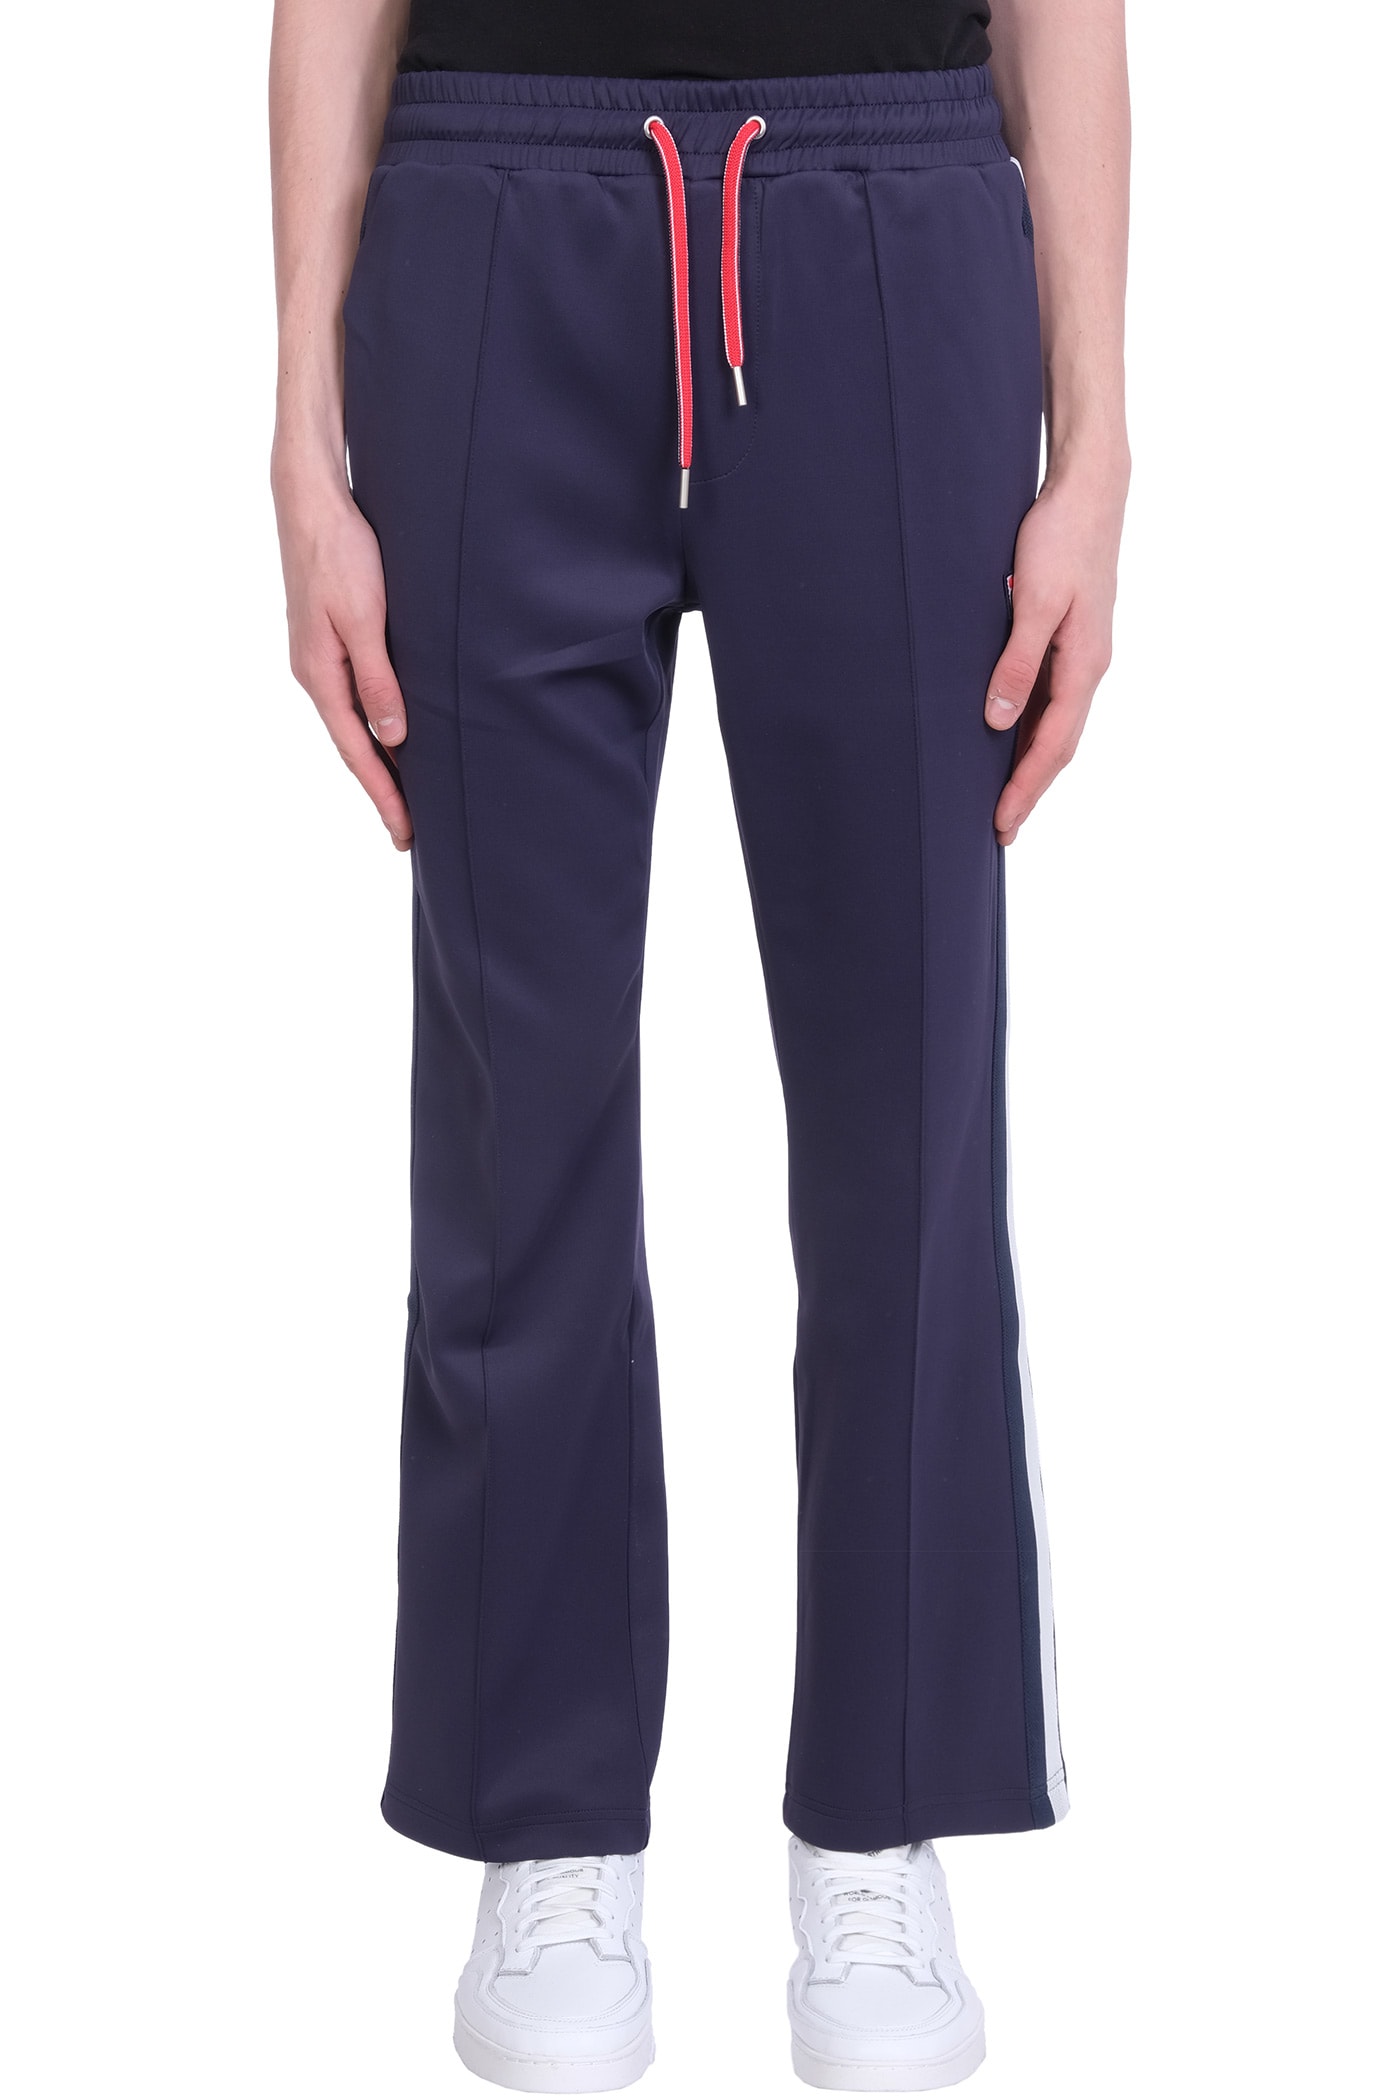 Fila Tauri Pants In Blue Polyester